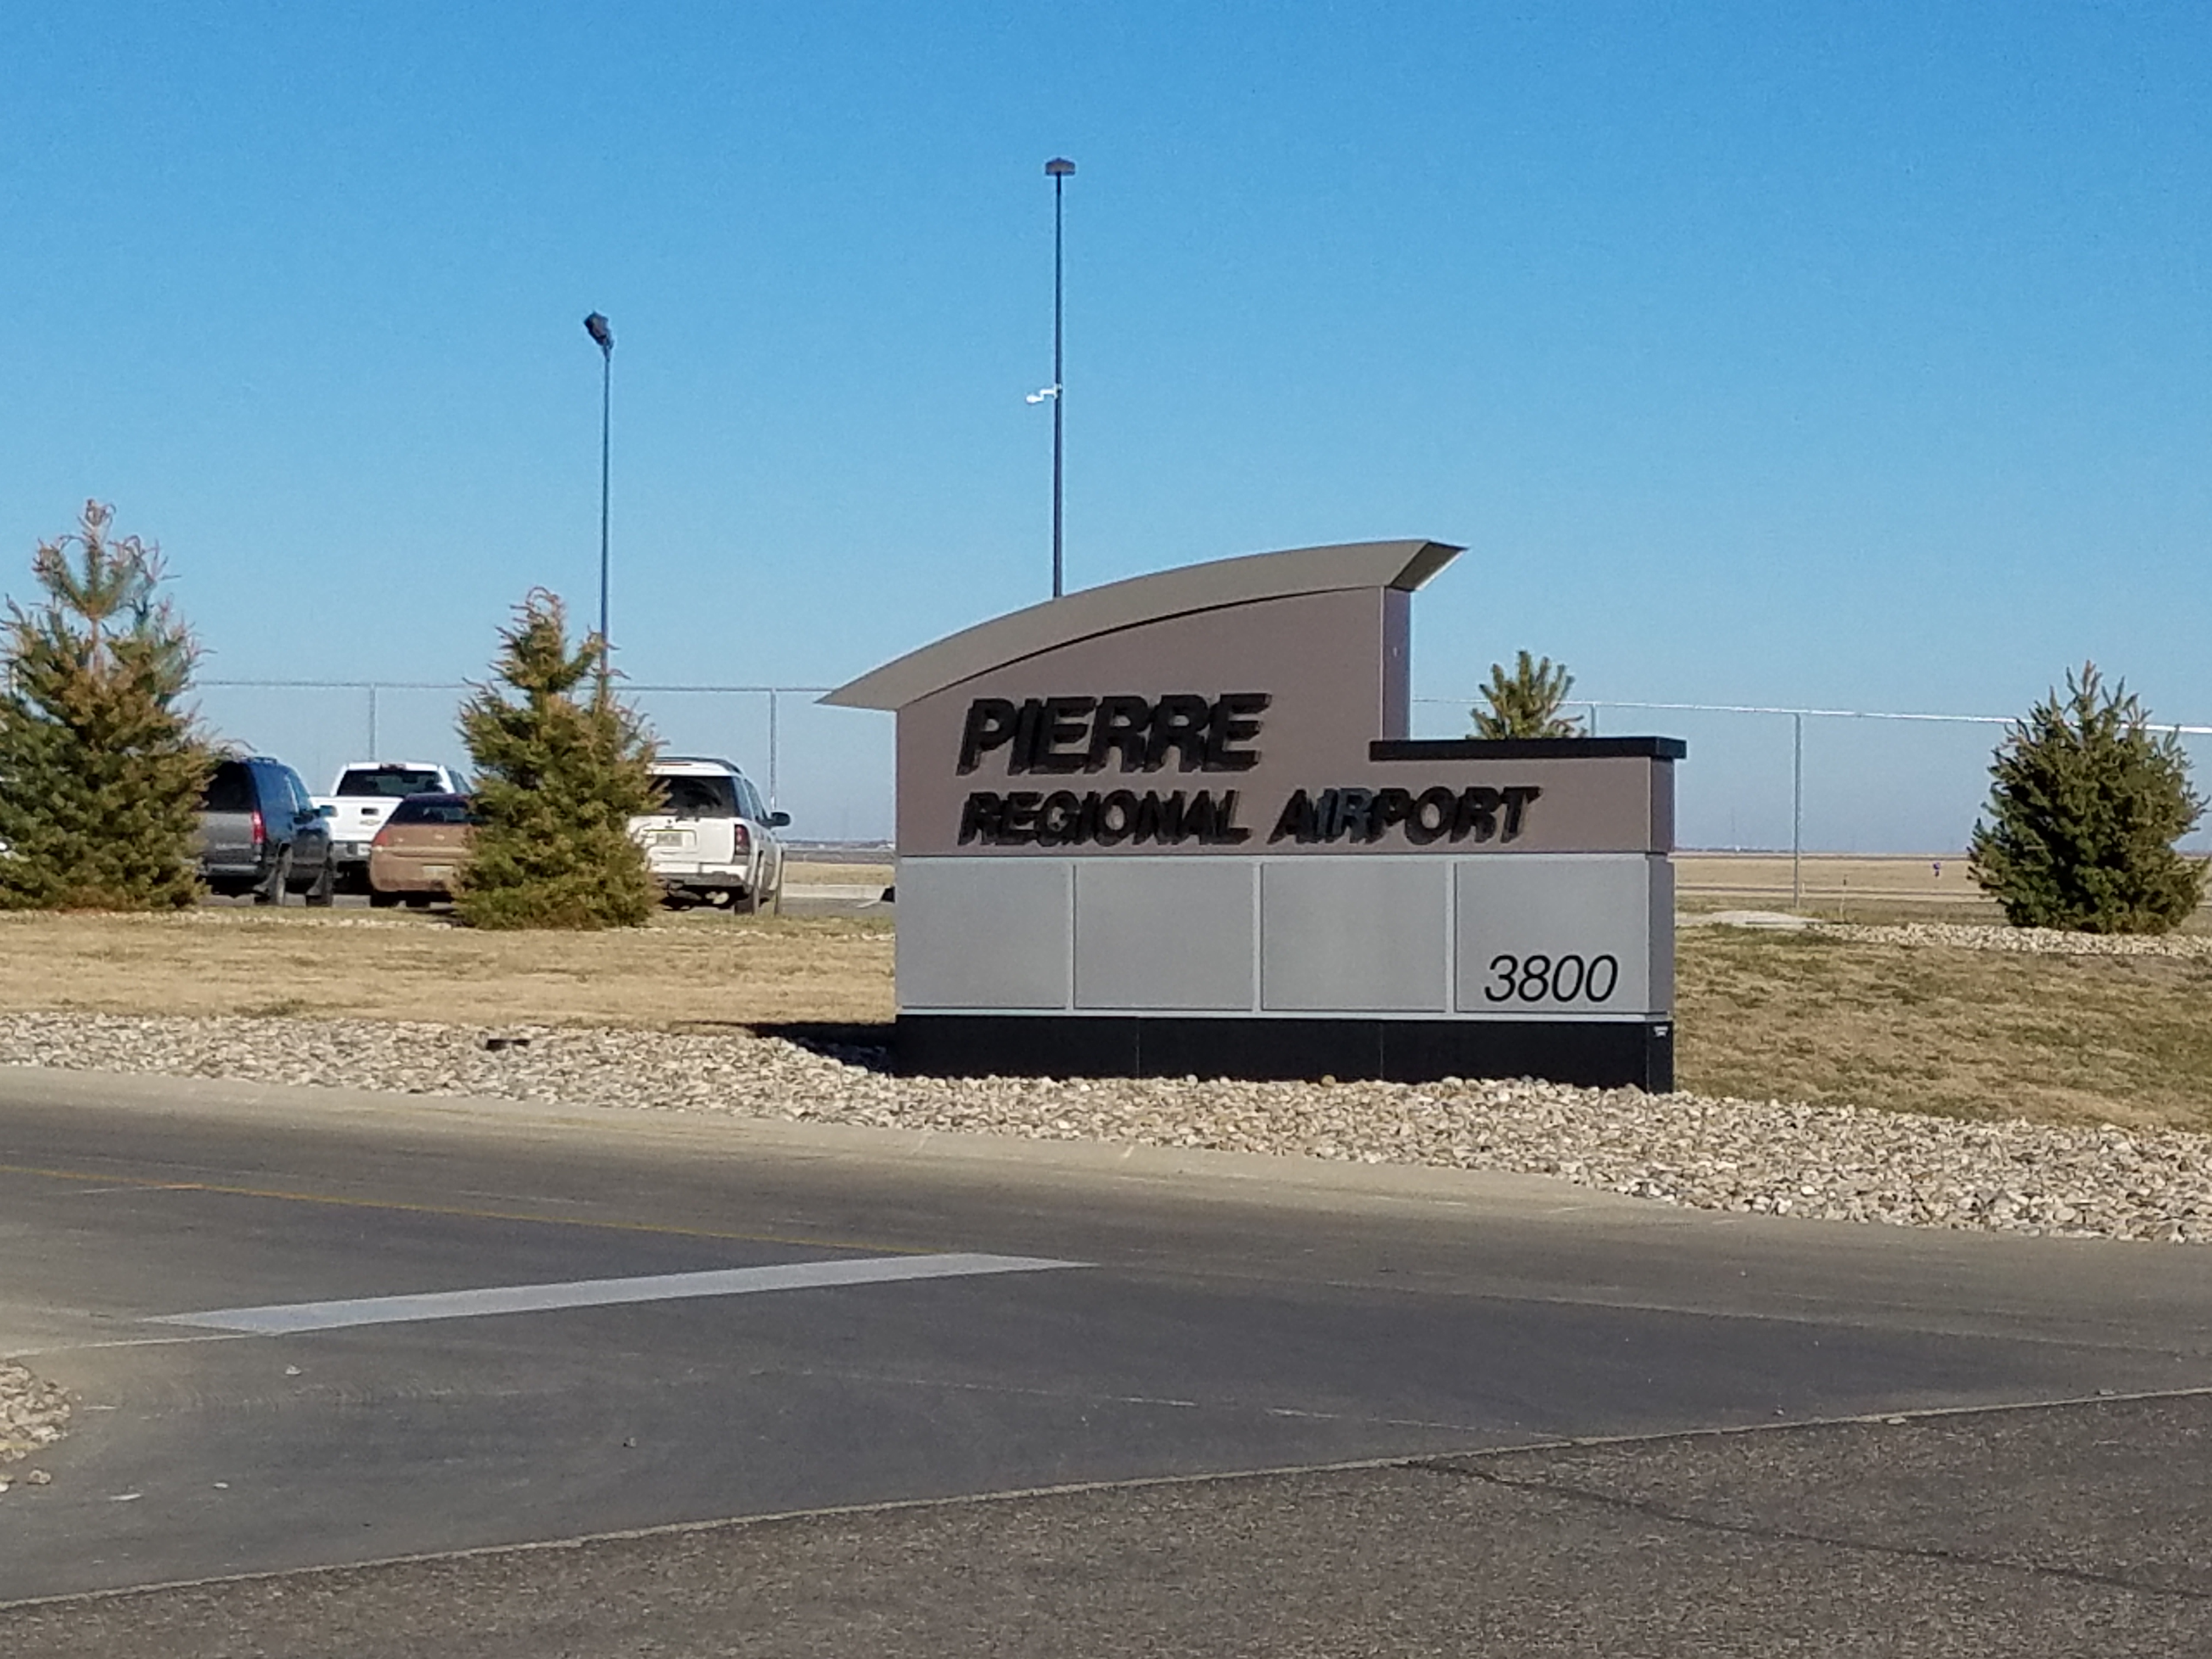 Pierre City Commission Approves Purchase Of Airplane Tracking Service